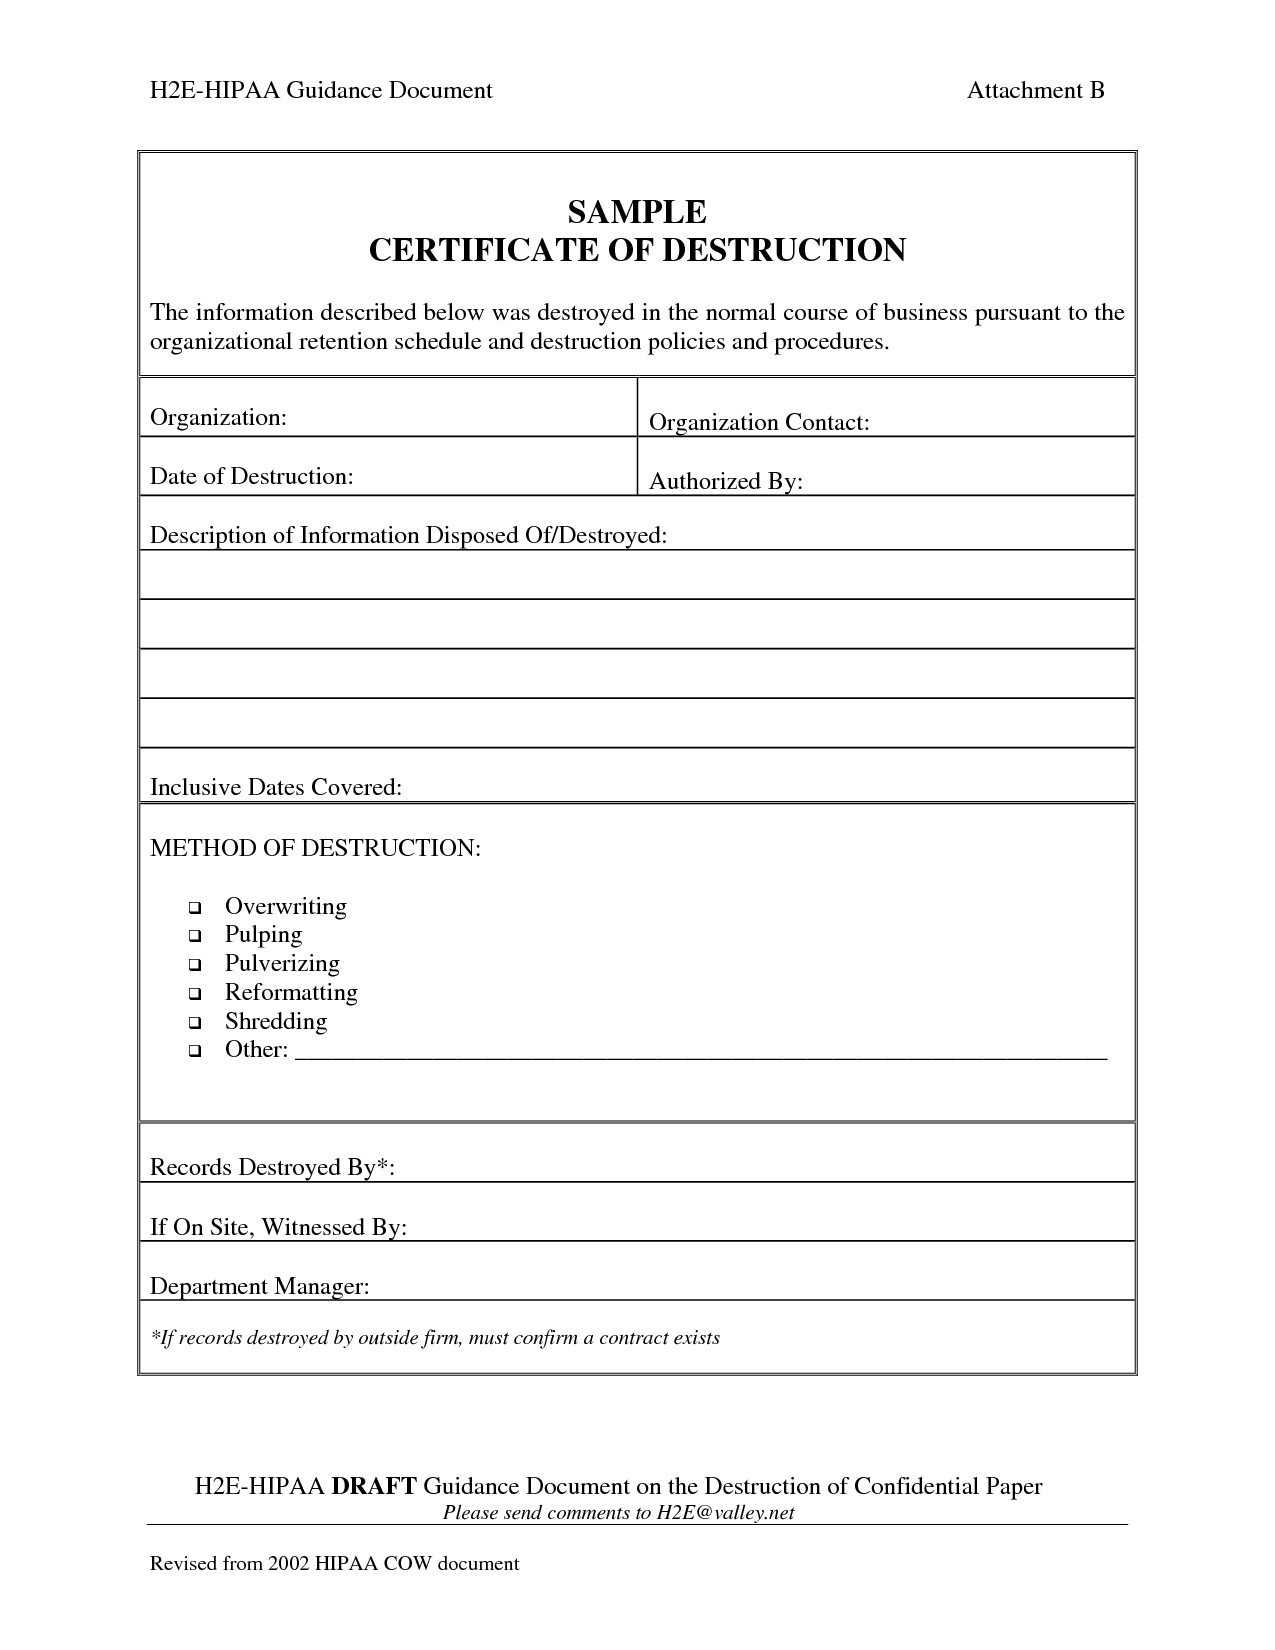 036 Samplete Of Destruction Confidential Info Perfect With Destruction Certificate Template